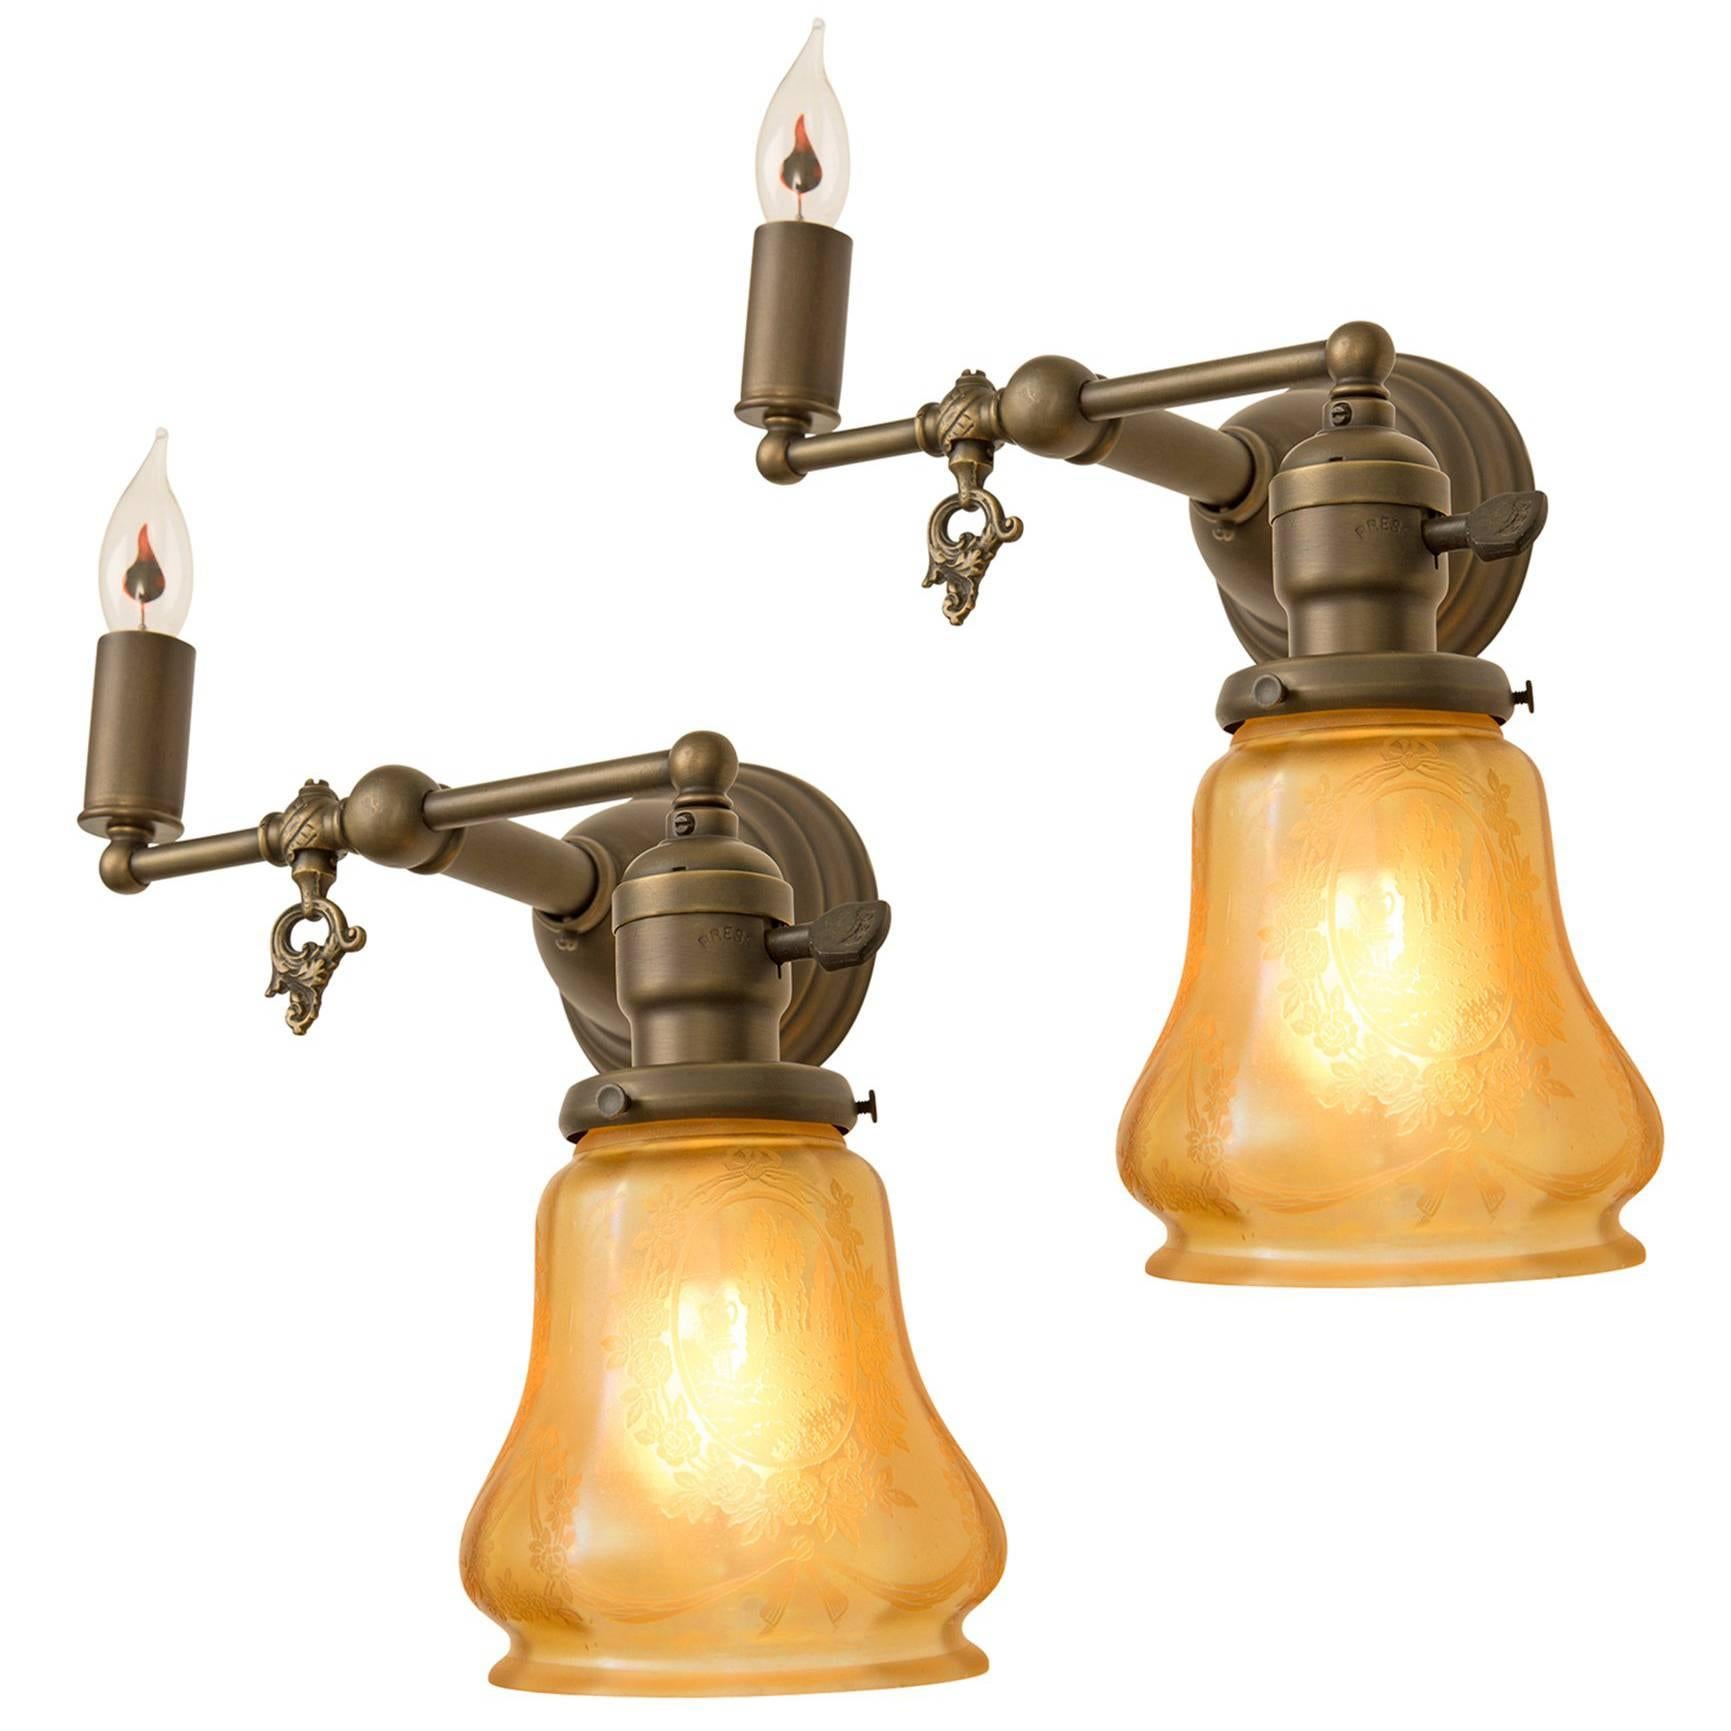 Pair of Gas-Electric Sconces with Iridized Amber Shades, circa 1905